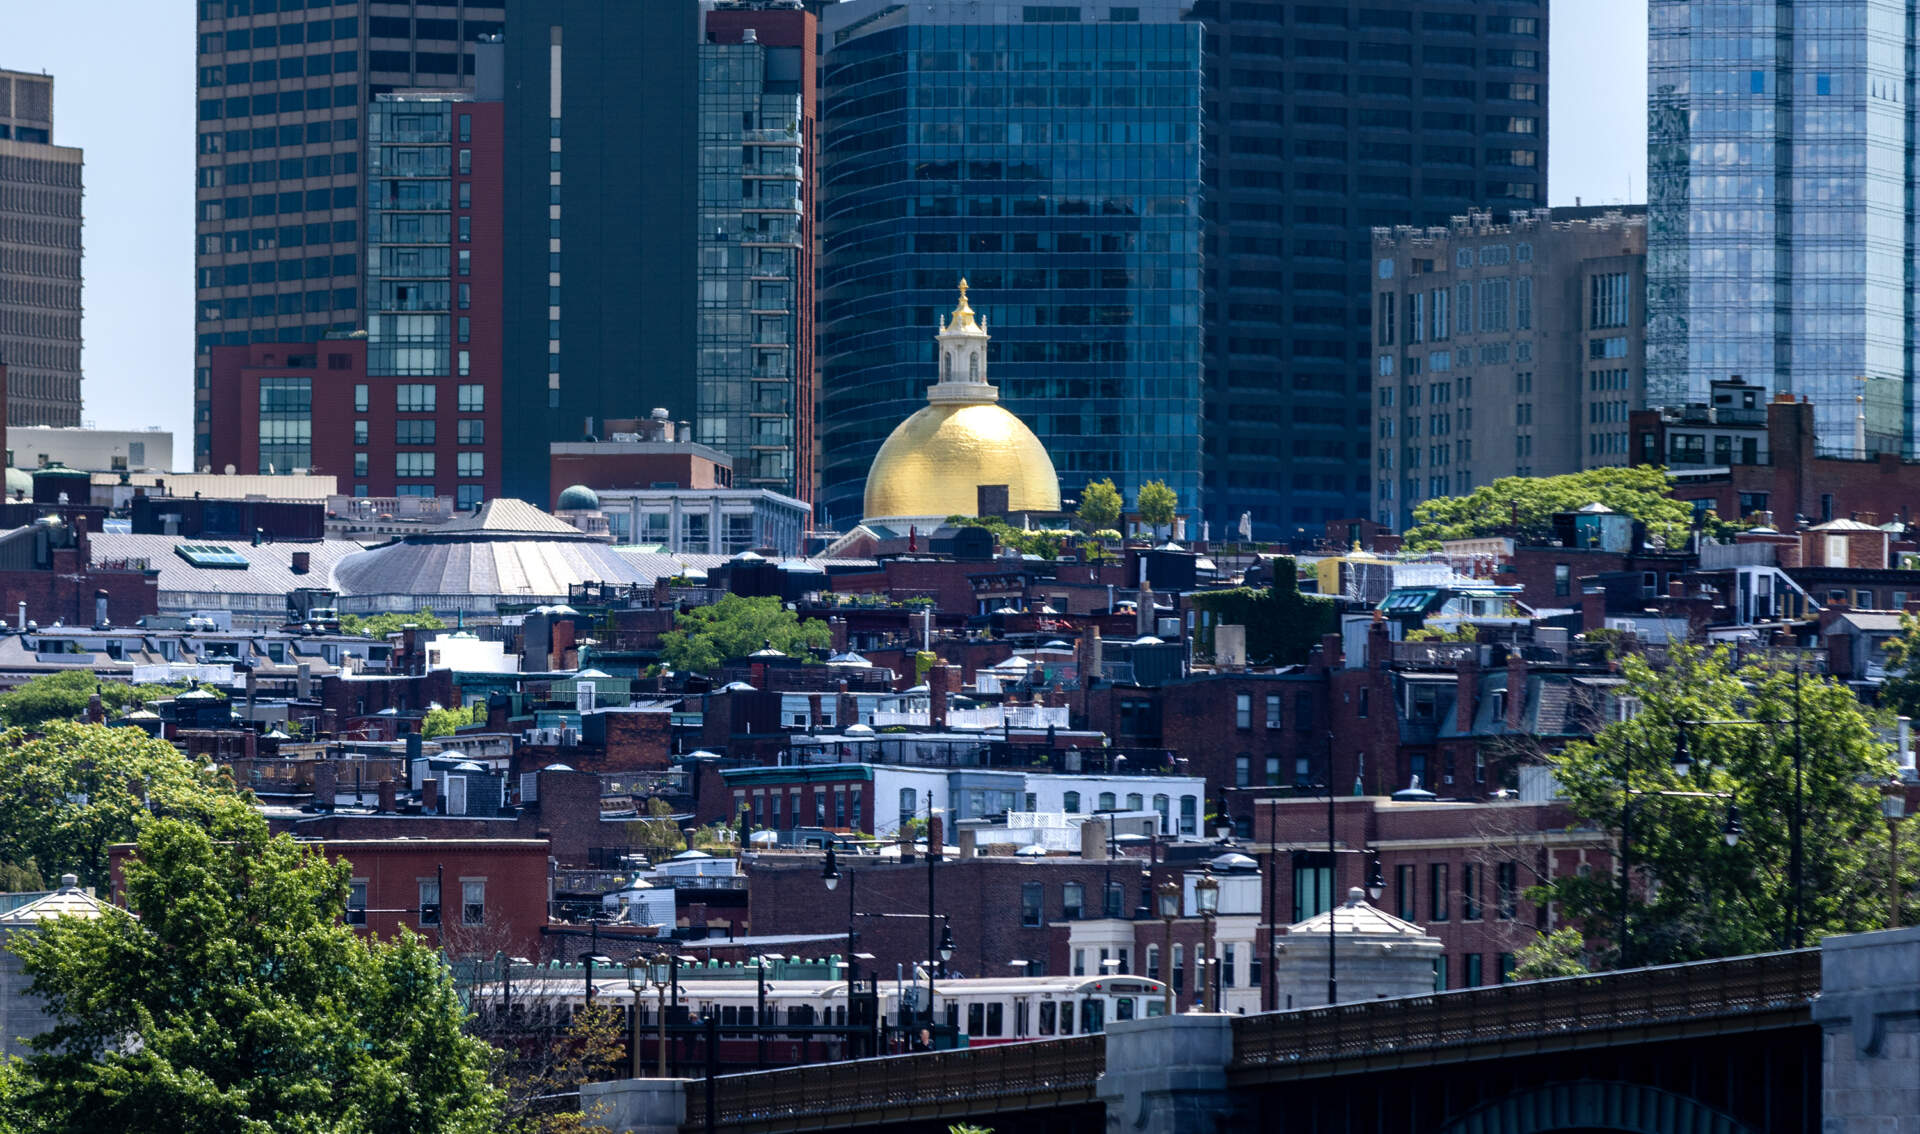 The dome of the Massachusetts State House peeks over the other buildings on Beacon Hill. (Jesse Costa/WBUR)